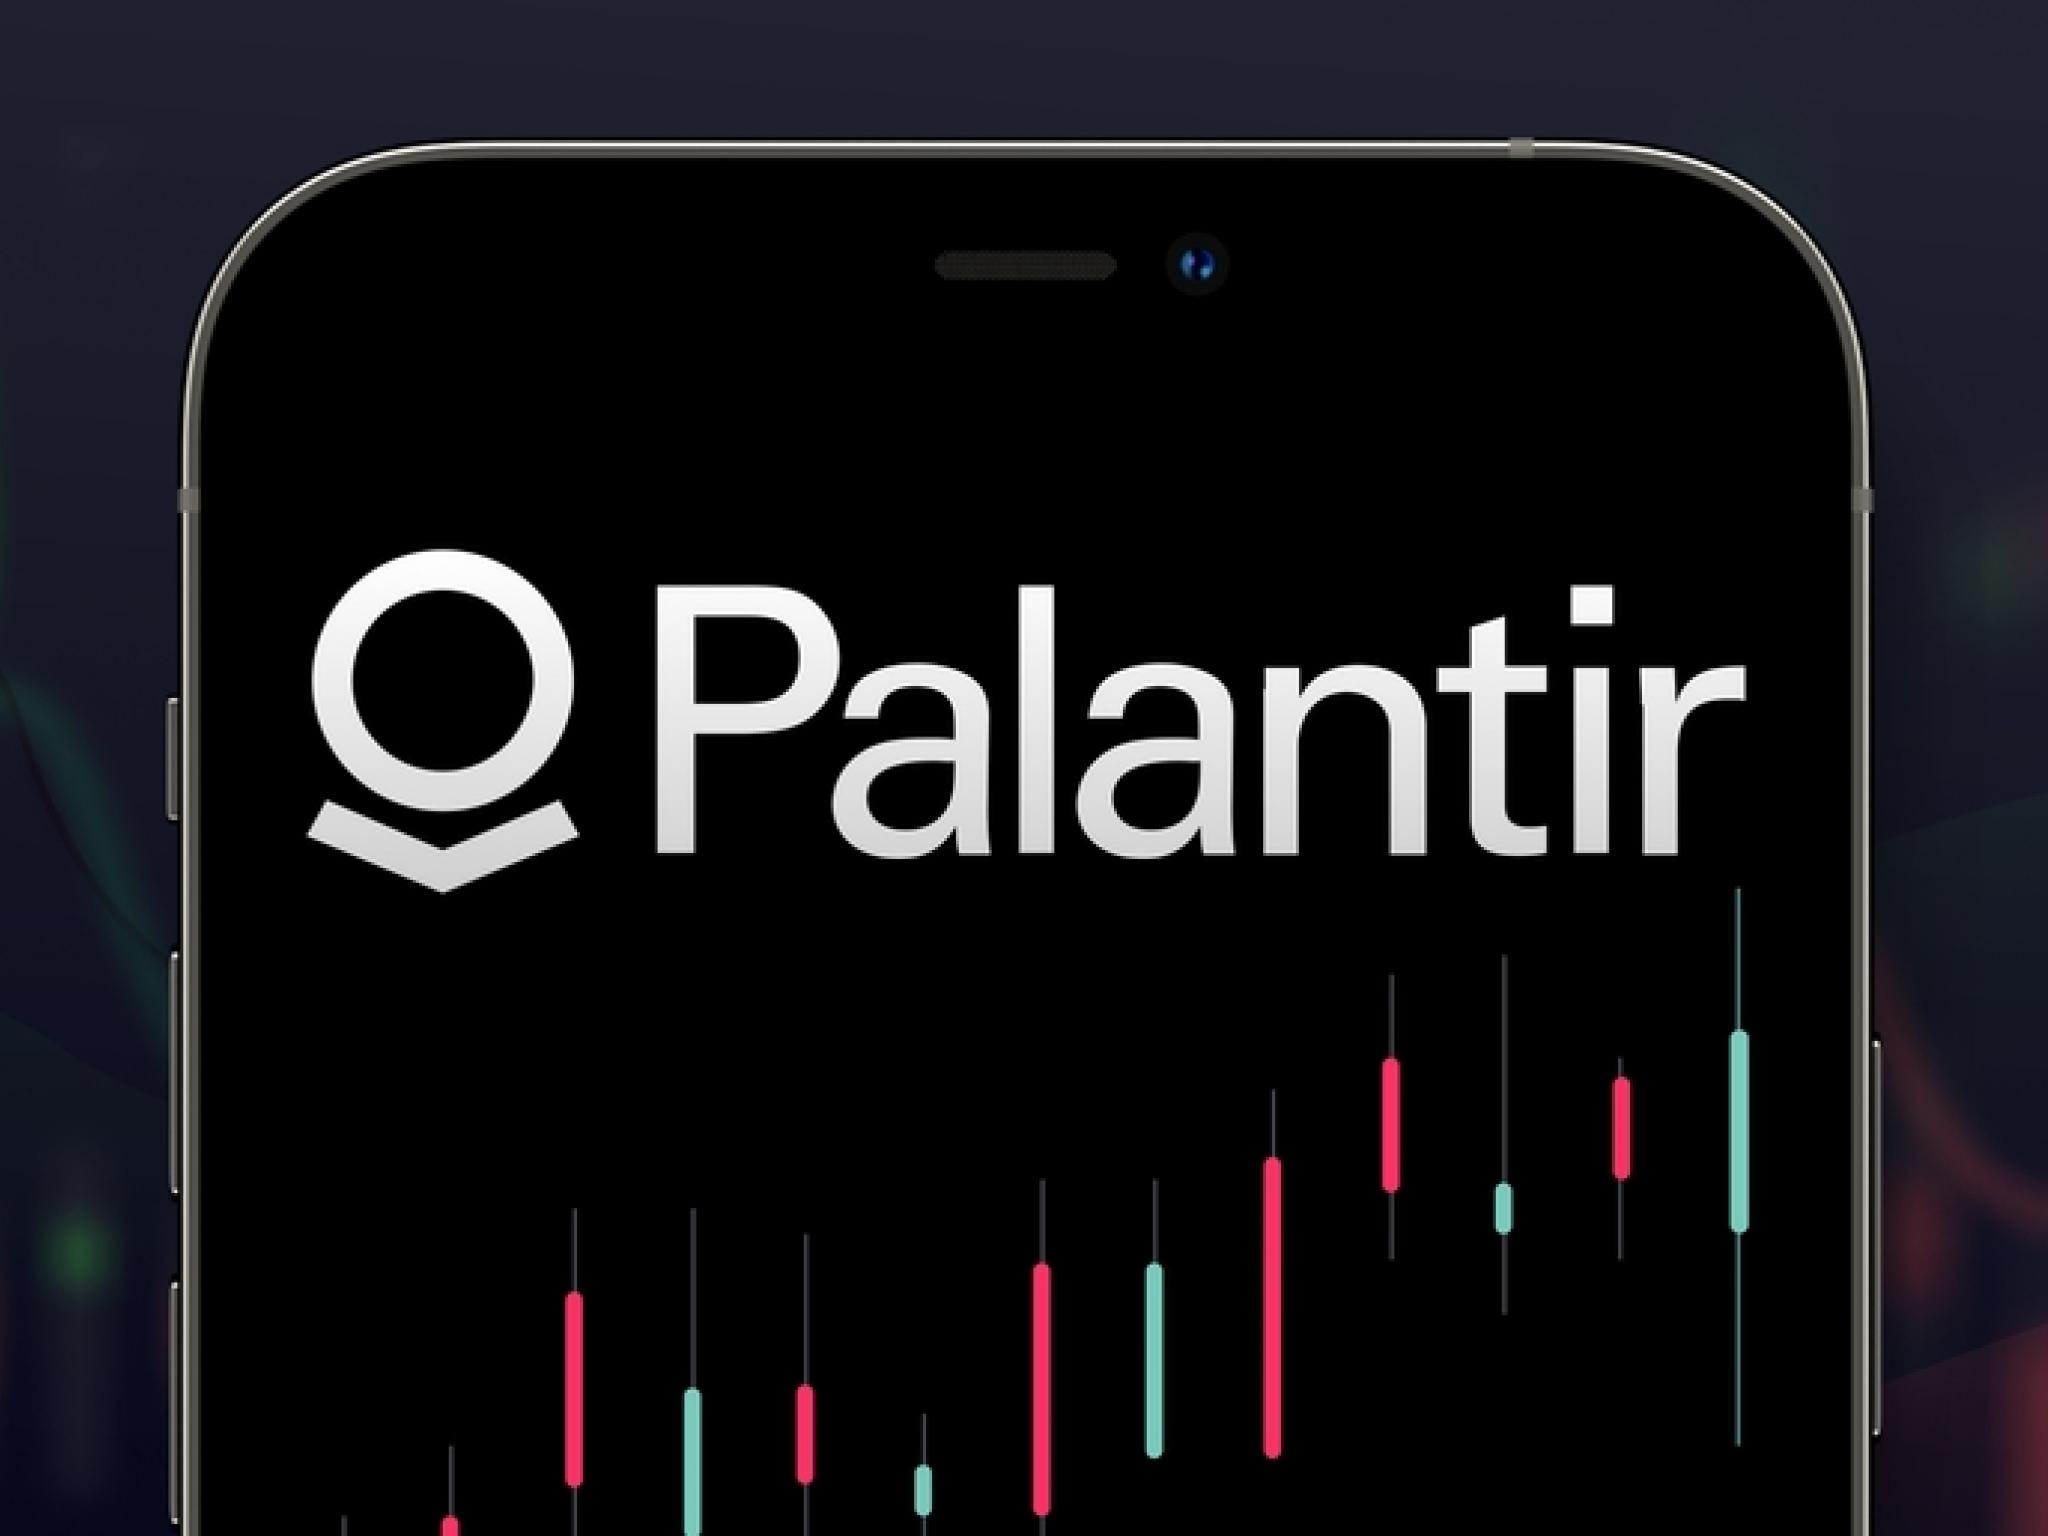  whats-going-on-with-palantir-technologies-shares-today 